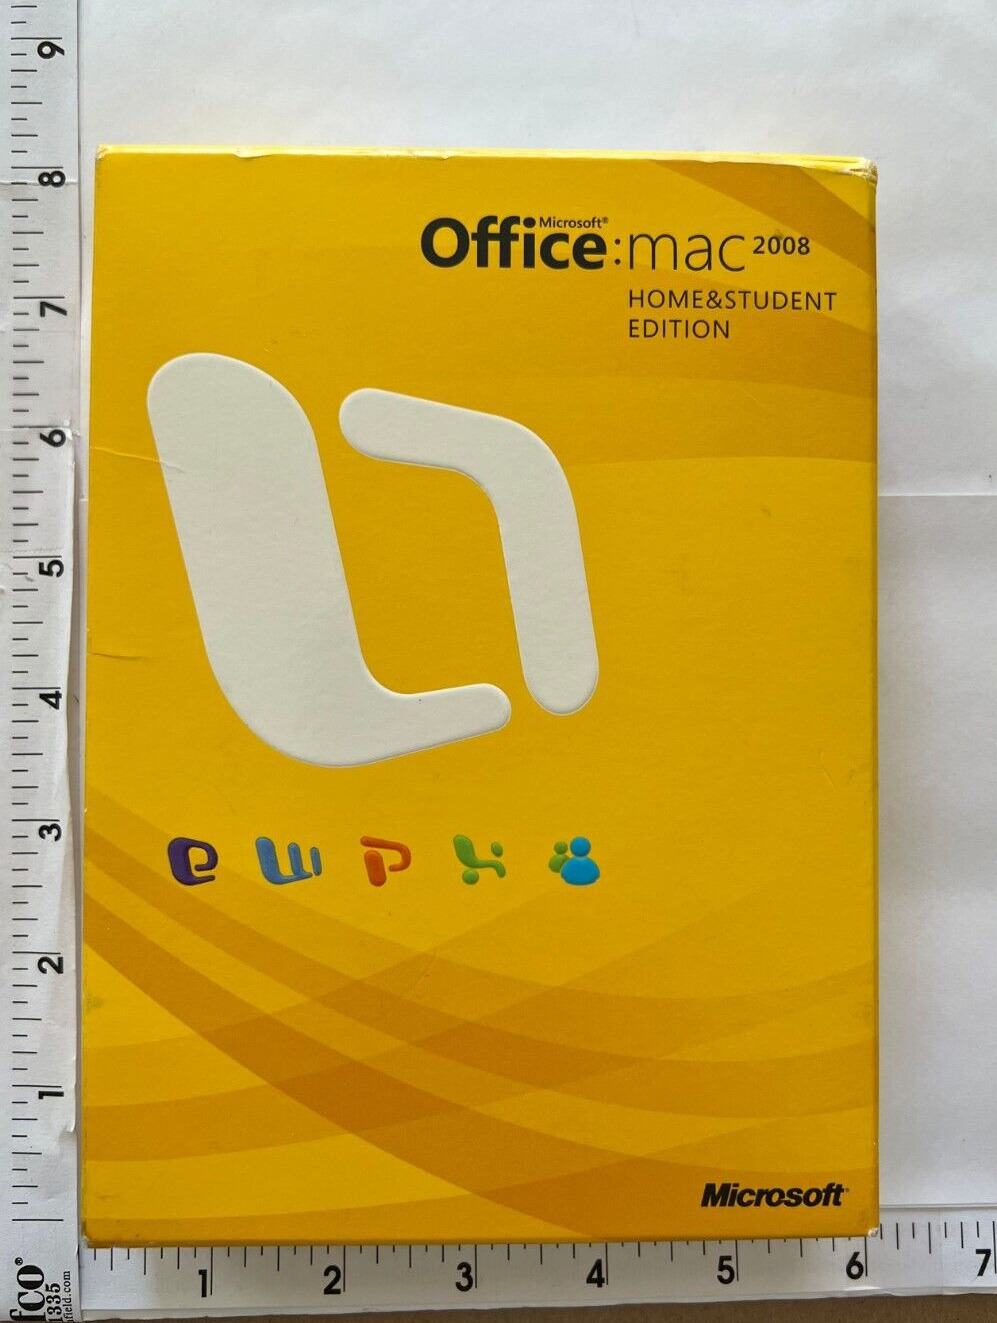 MICROSOFT OFFICE MAC 2008 HOME & STUDENT EDITION WITH 3 PRODUCT KEYS